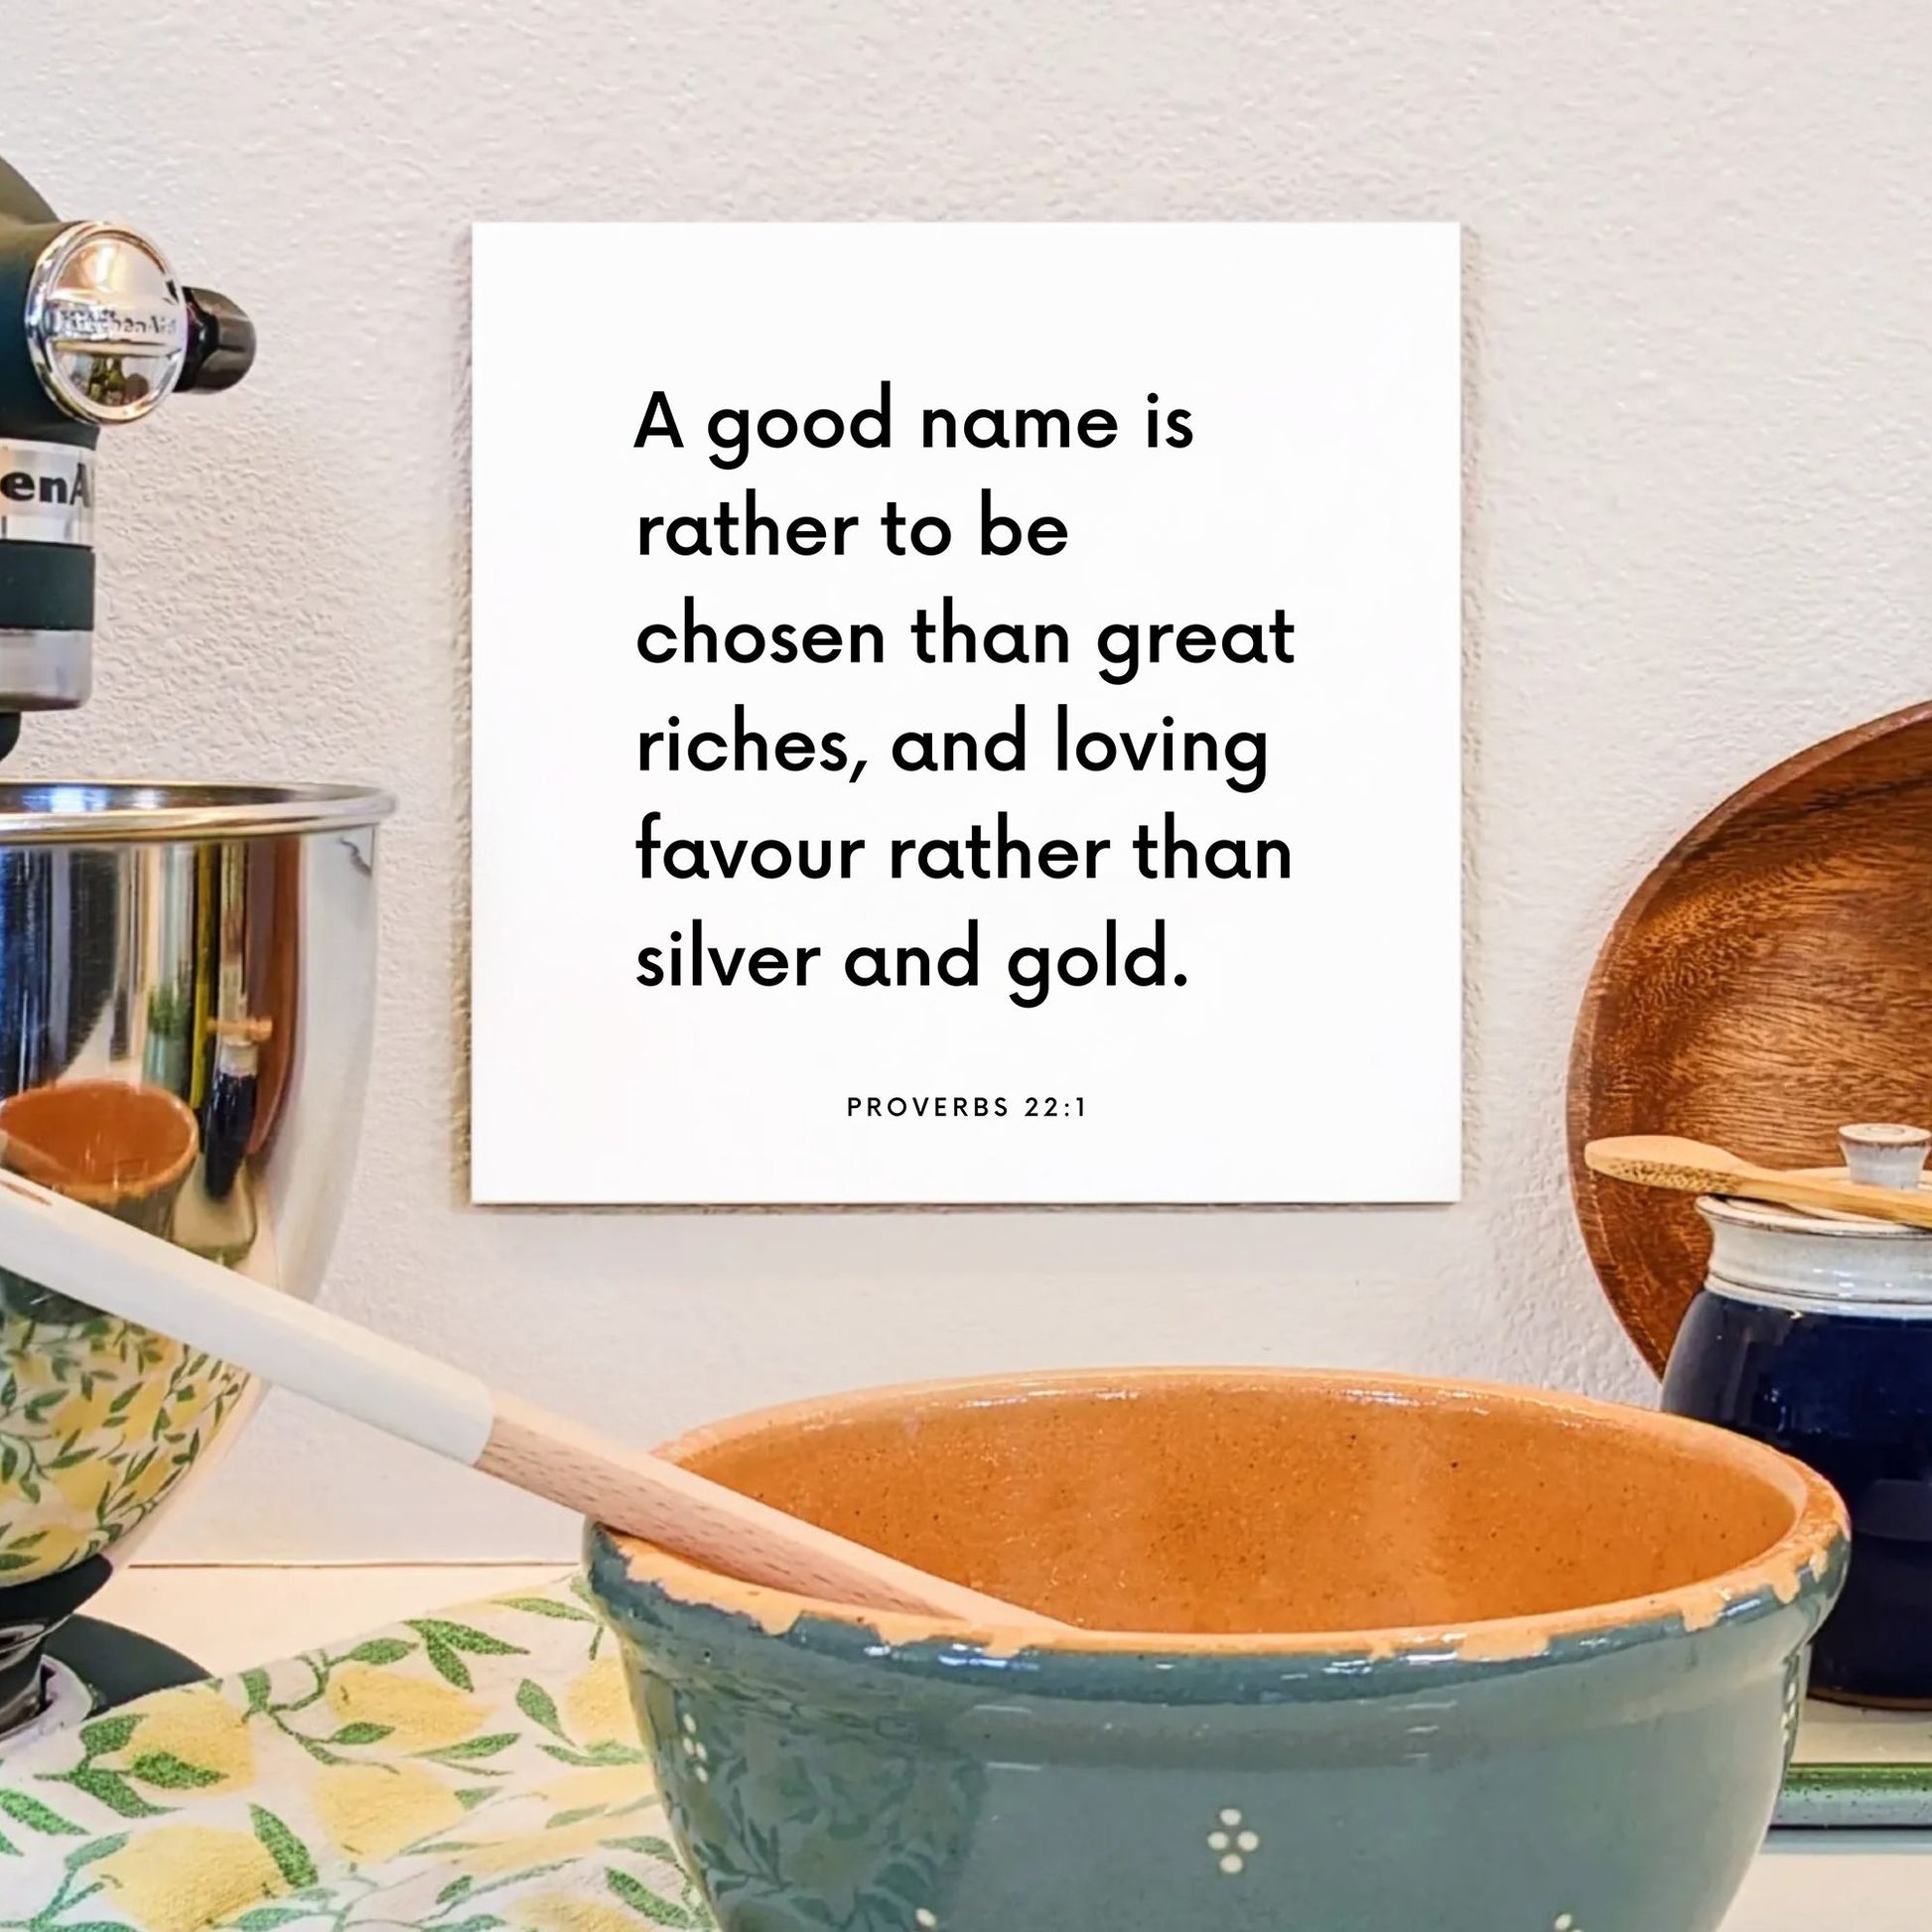 Kitchen mouting of the scripture tile for Proverbs 22:1 - "A good name is rather to be chosen than great riches"